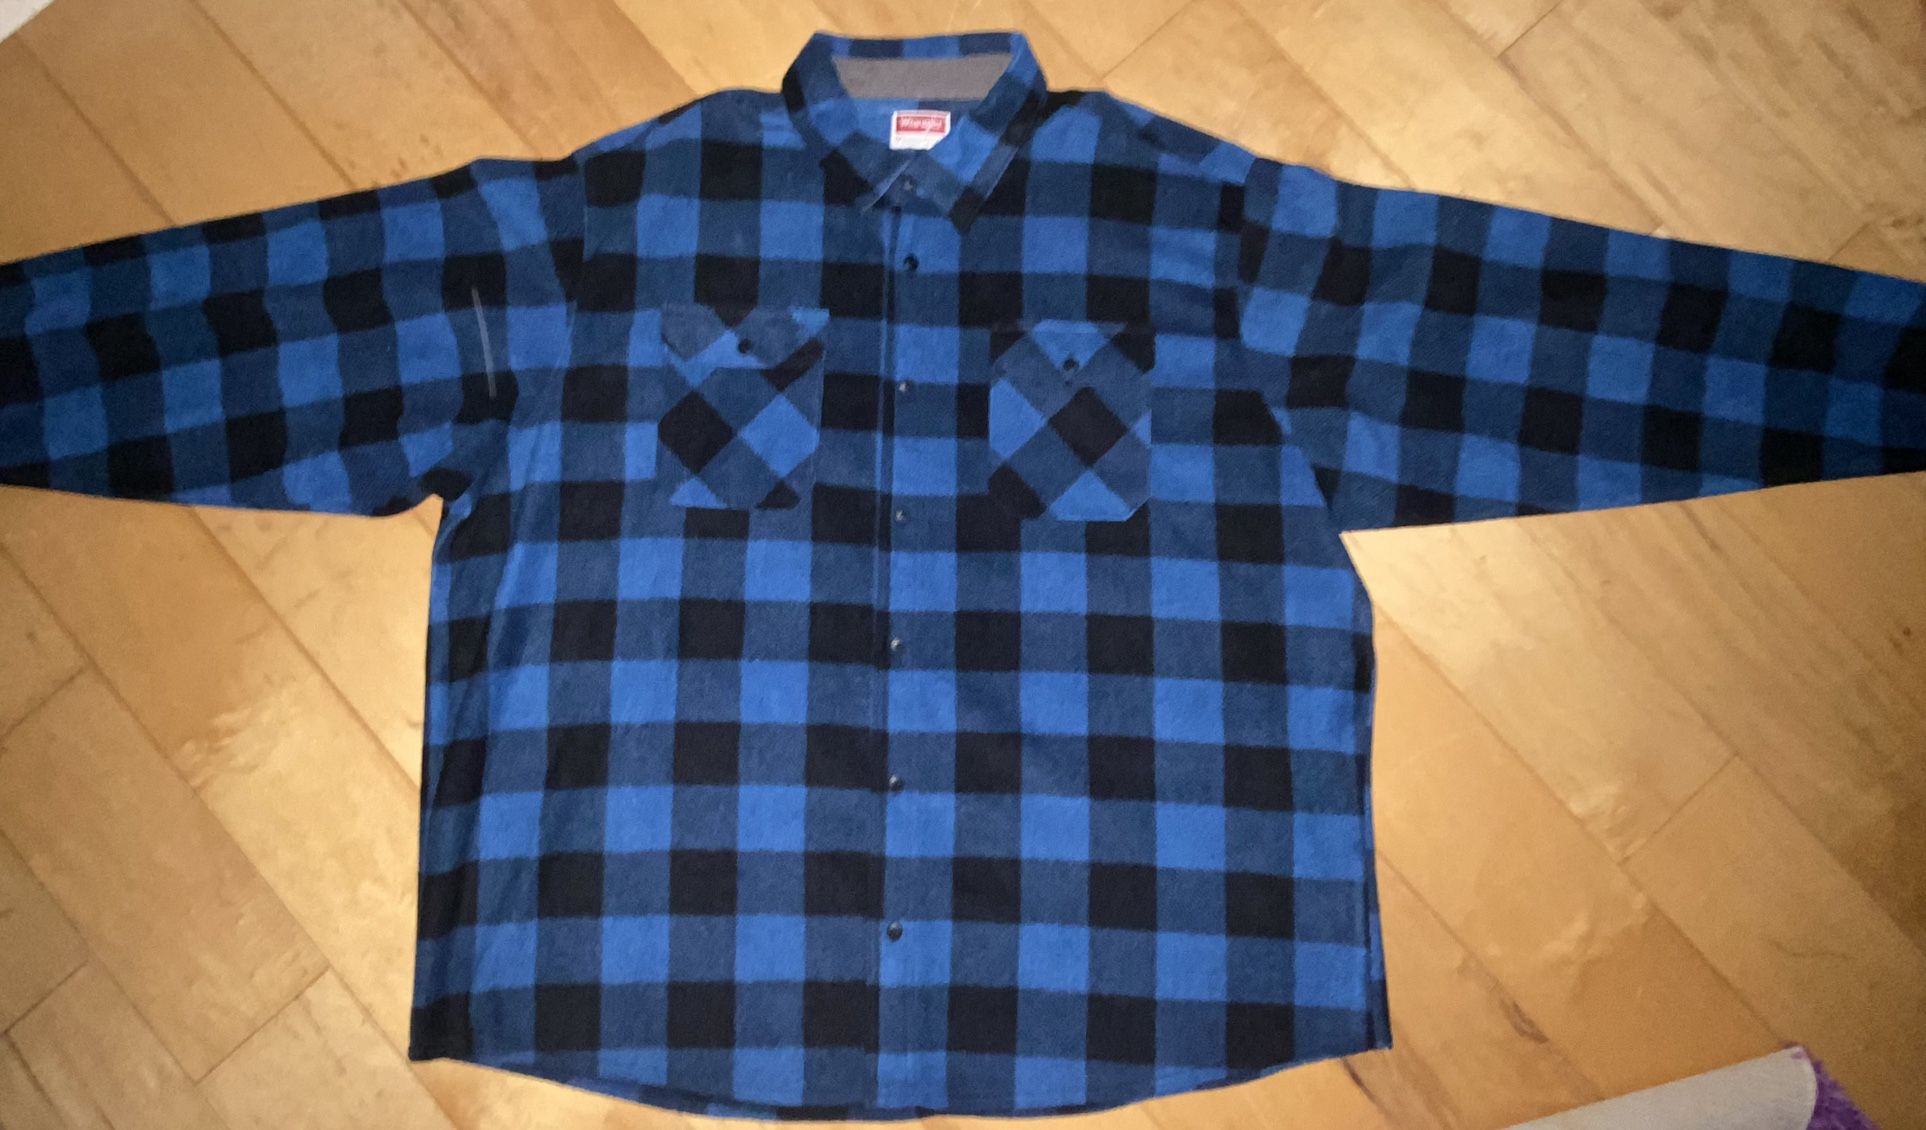 WRANGLER PREMIUM QUALITY -BLUE FLEECE LONG SLEEVE PLAID FLANNEL BUTTON UP SHIRT/MEN’S SIZE:3XL(PREOWNED/BARELY USED)